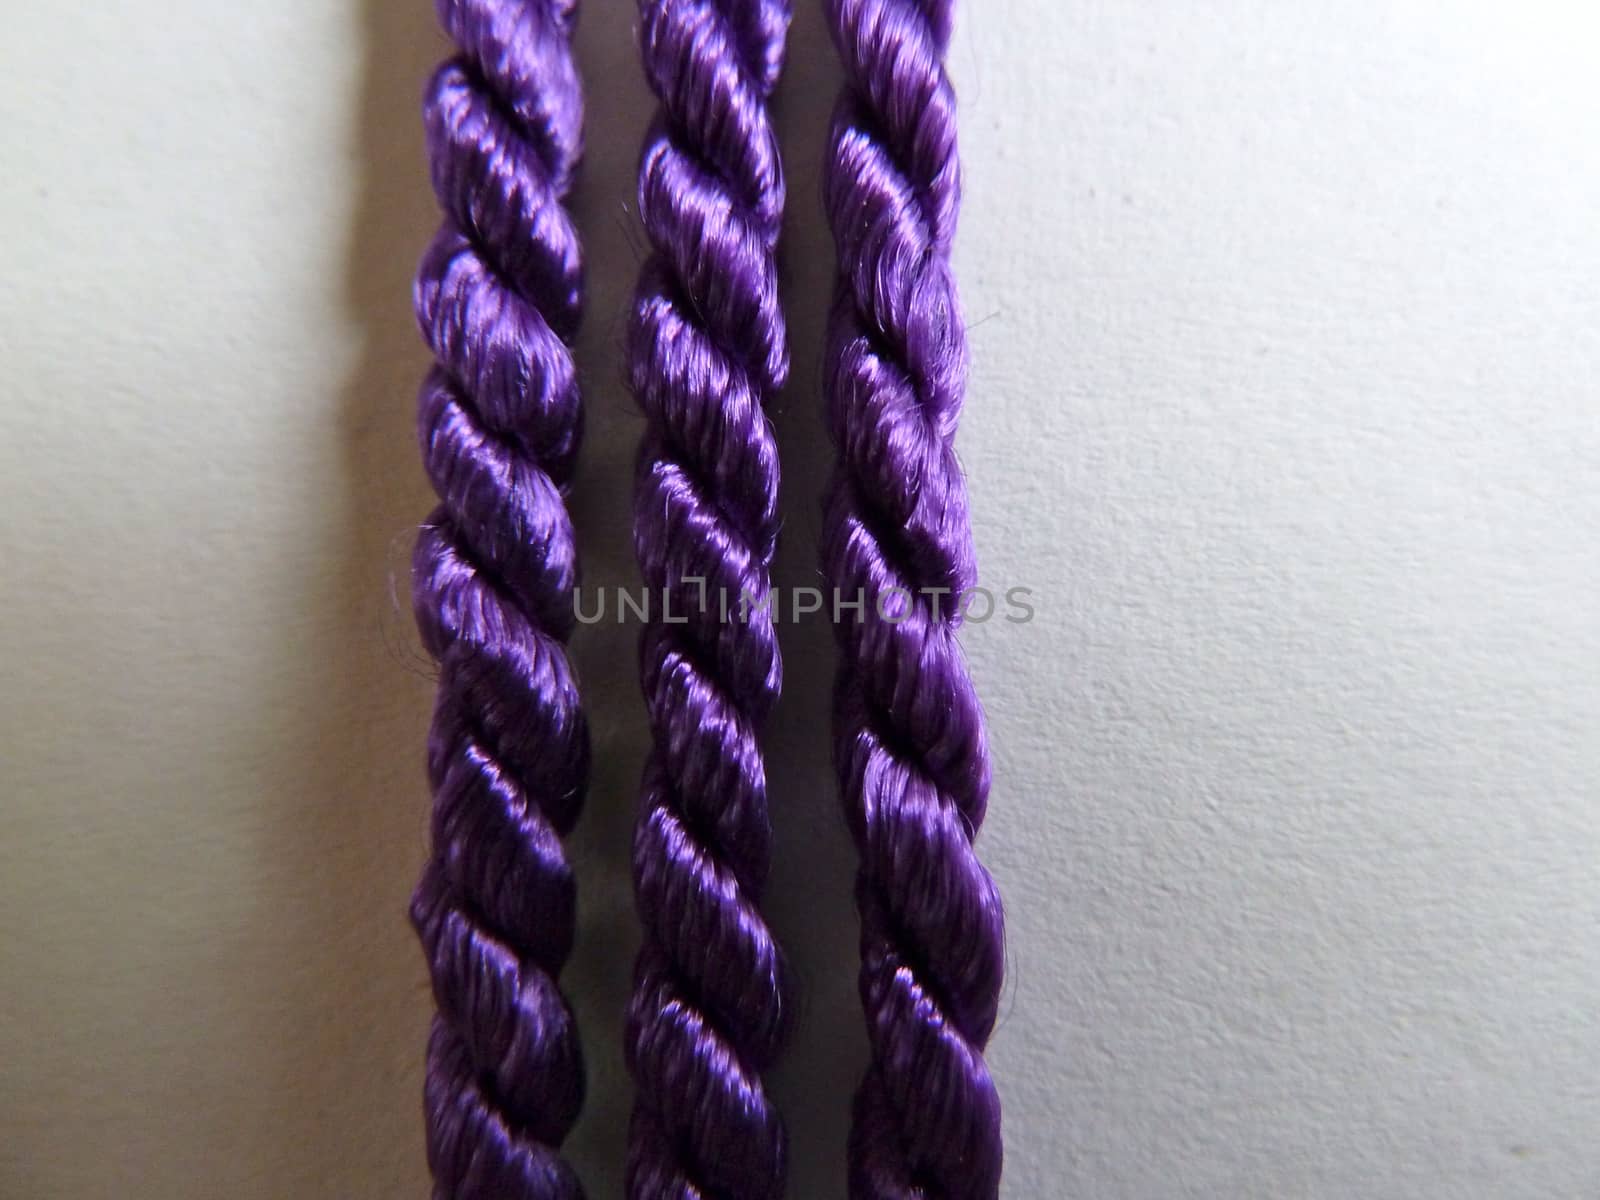 Three bright purple ropes in a line as a background